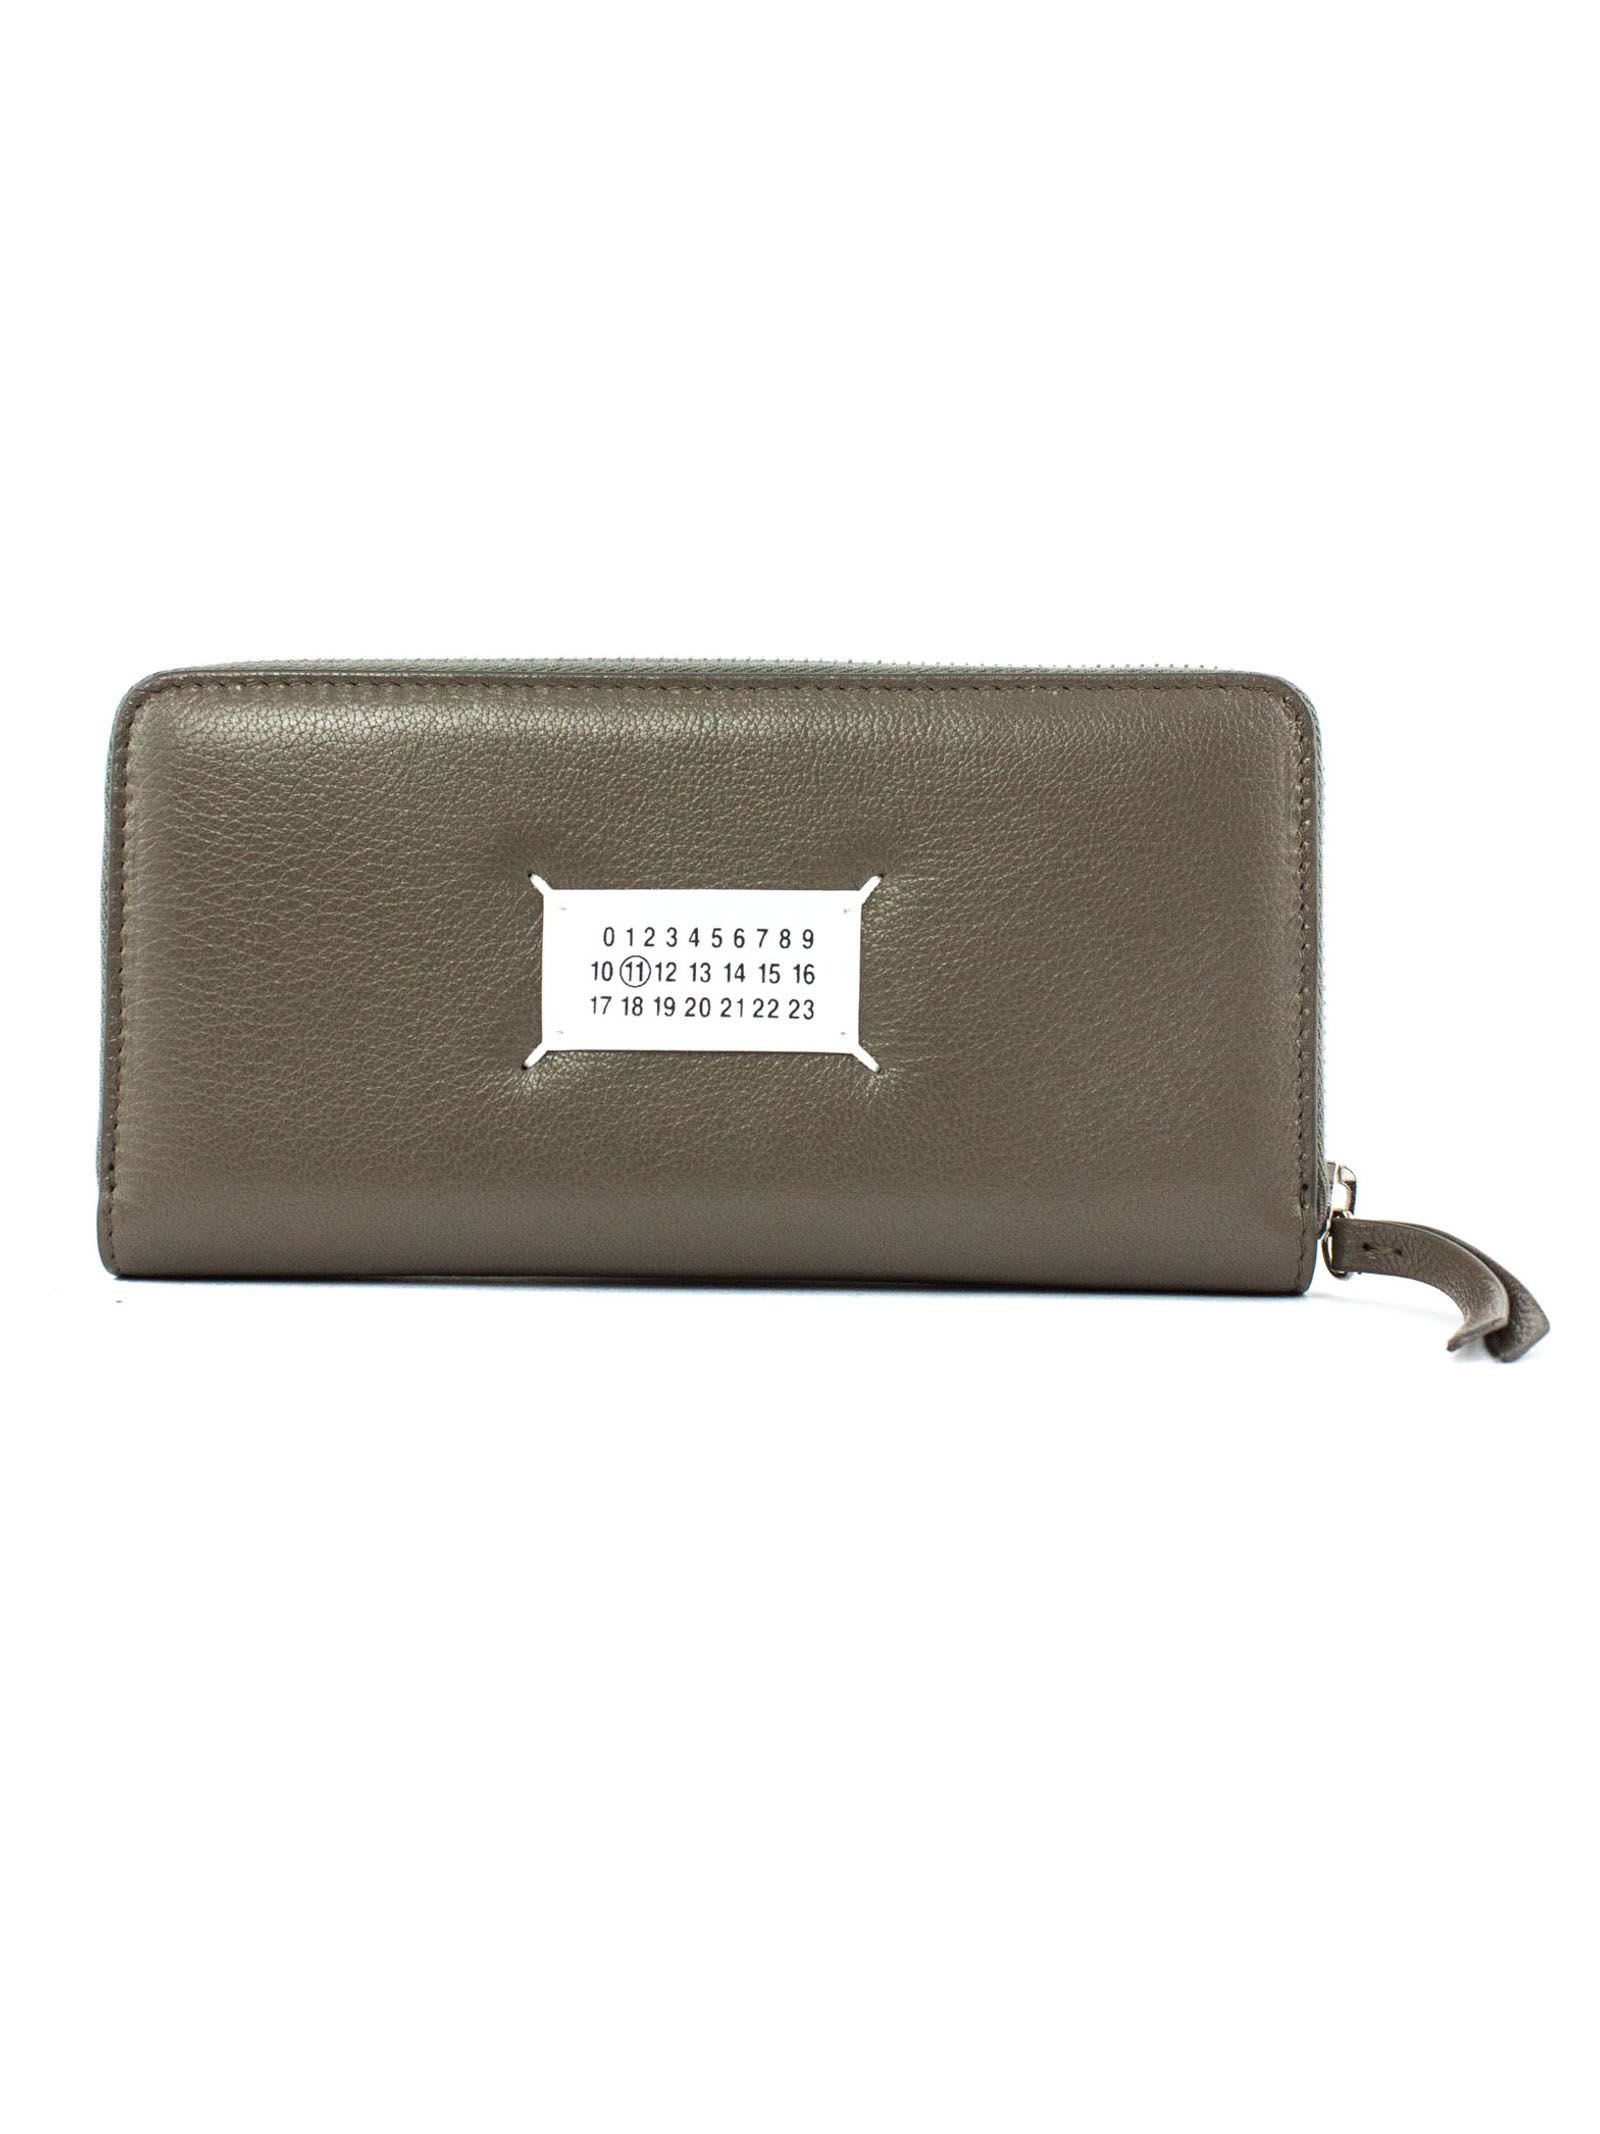 Maison Margiela Wallet In Green Textured Leather